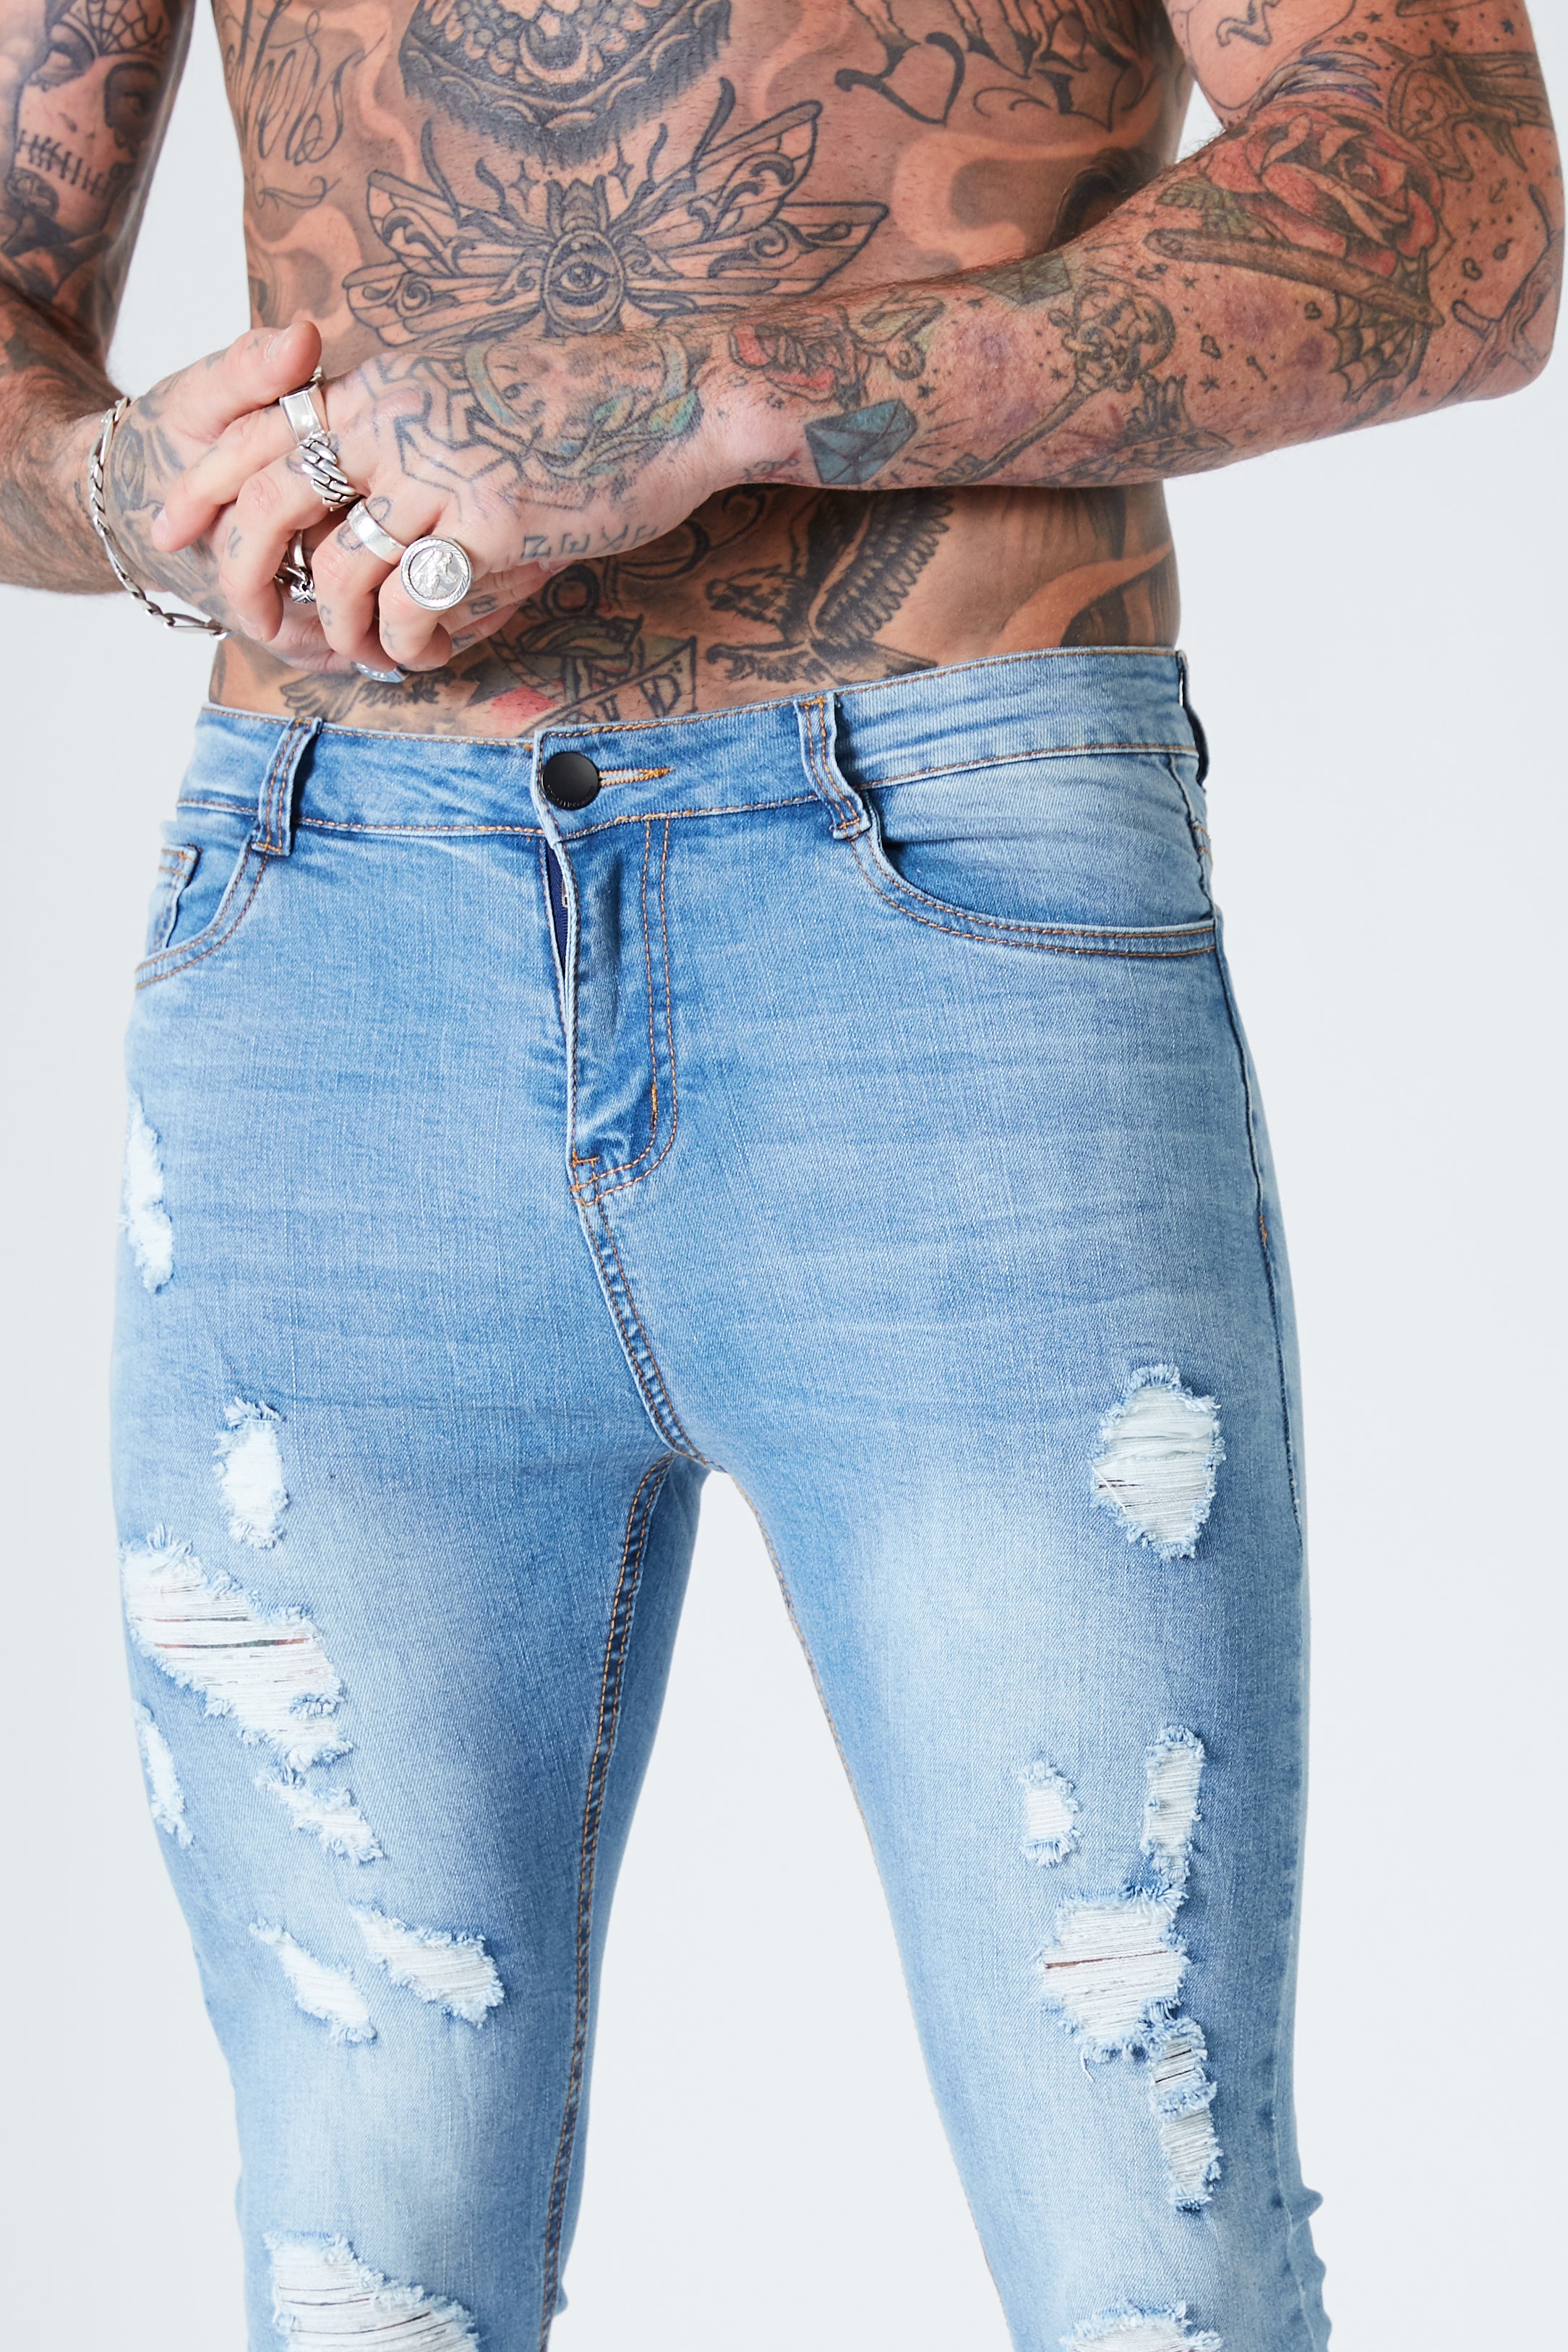 Ripped & Repaired Spray on Jeans - Blue Fade - SVPPLY. STUDIOS 